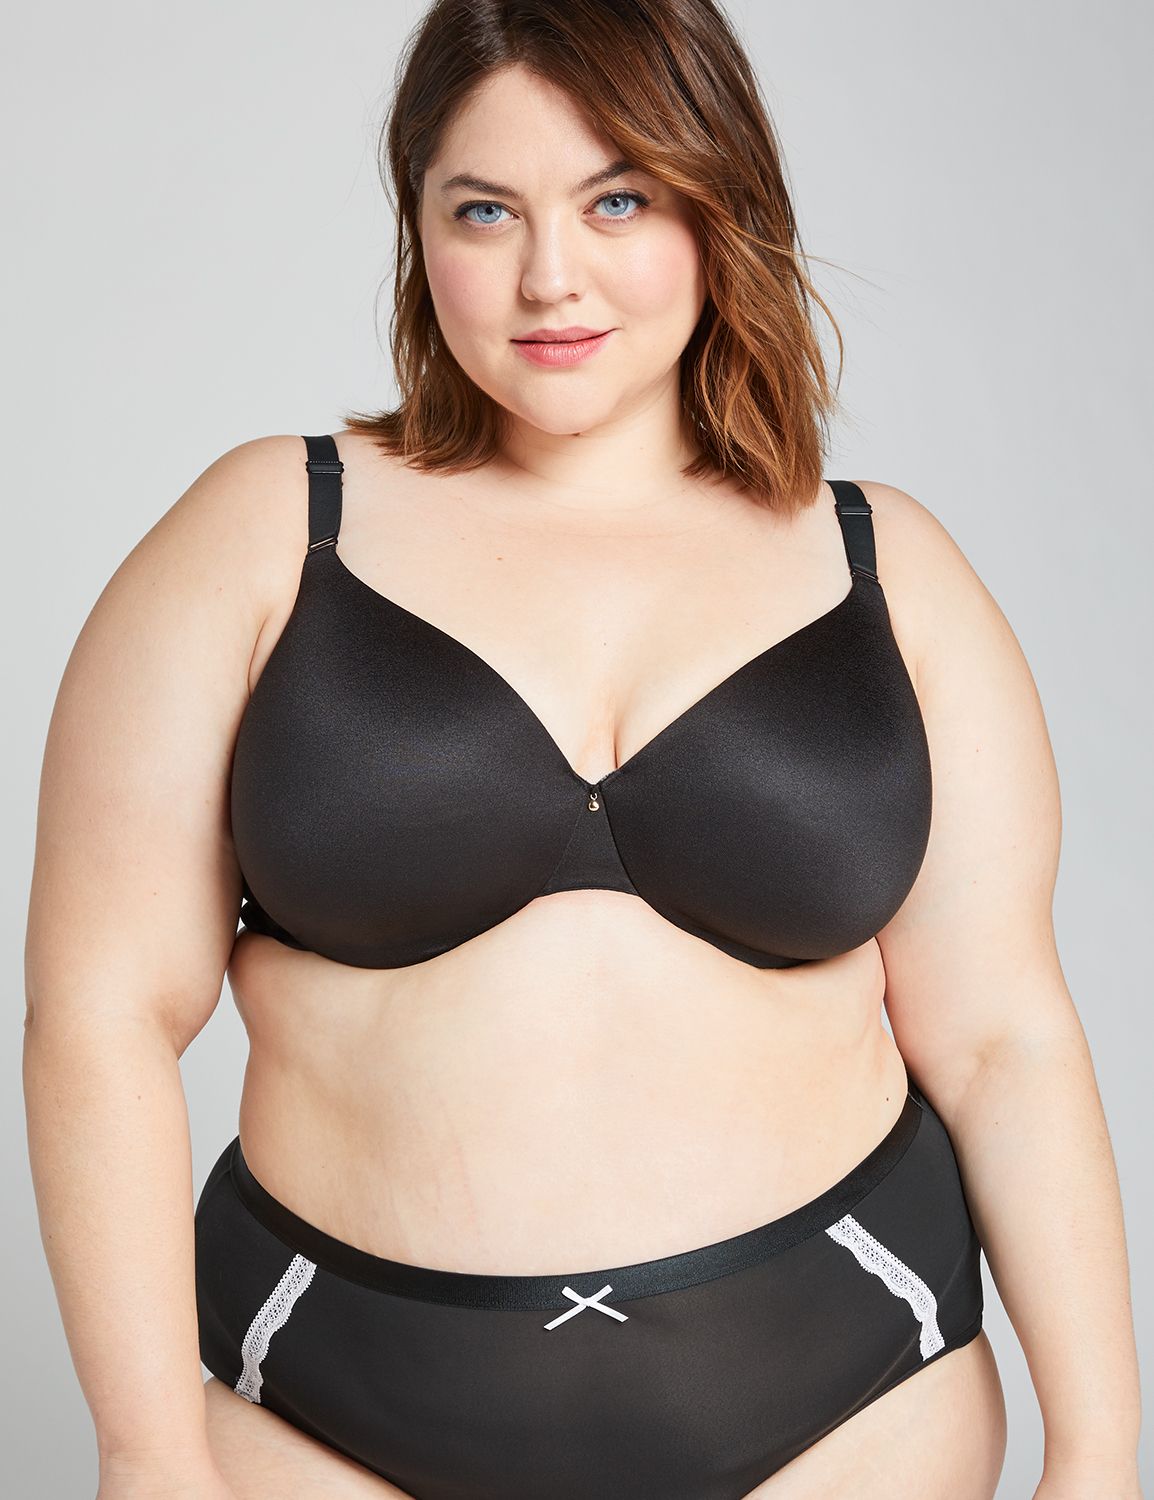 Don't Miss Out on Irresistible Savings on Lane Bryant Cacique Bras